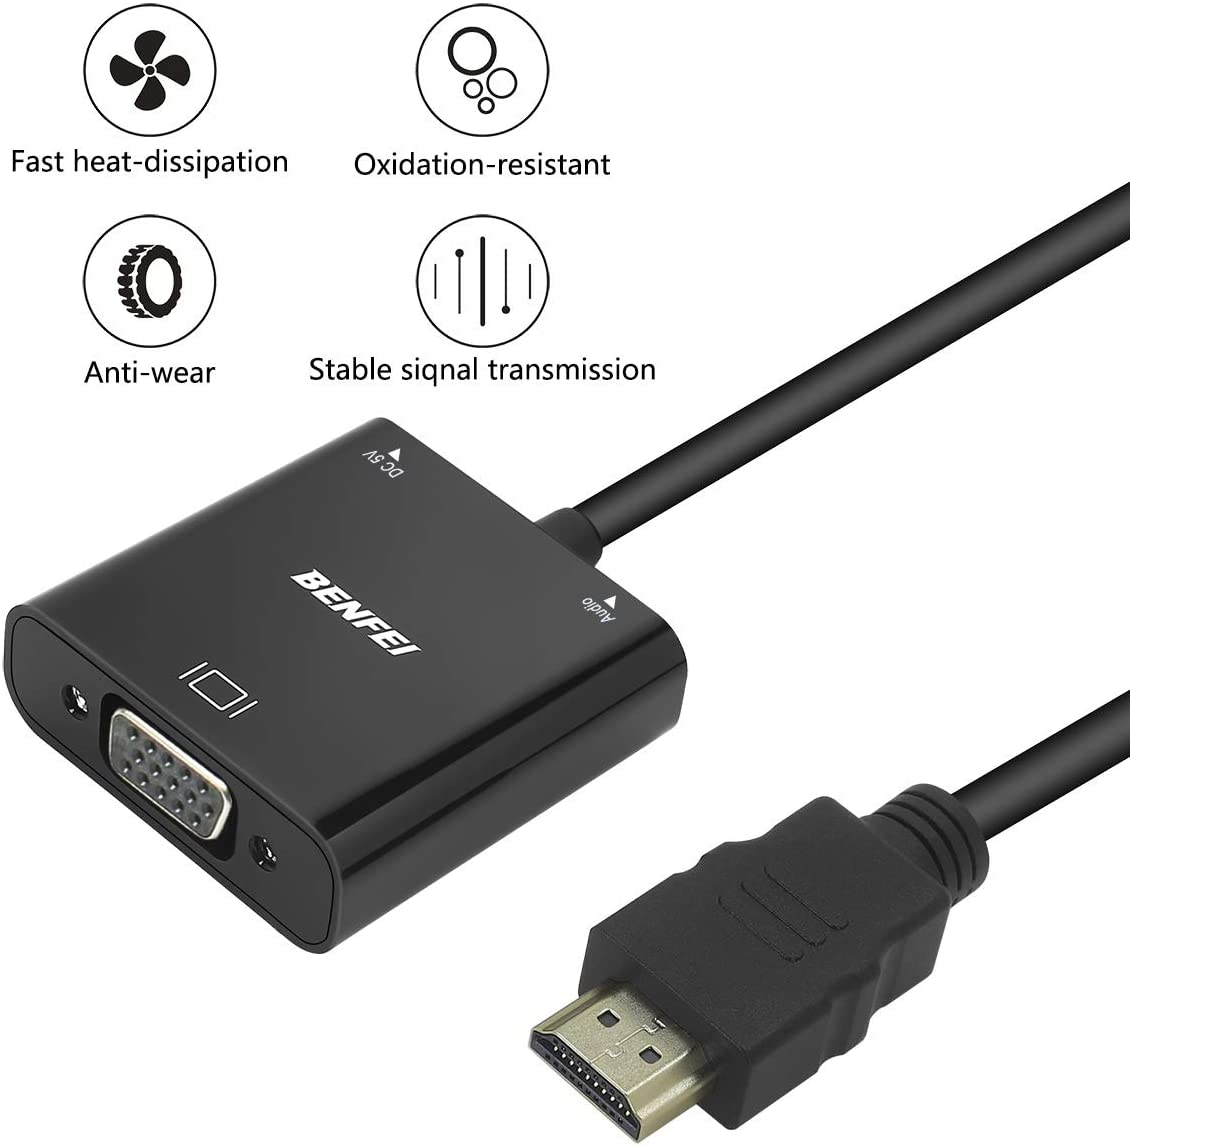 BENFEI HDMI to VGA 3 Feet Cable, Uni-Directional HDMI (Source) to VGA  (Display) Cable (Male to Male) Compatible for Computer, Desktop, Laptop,  PC